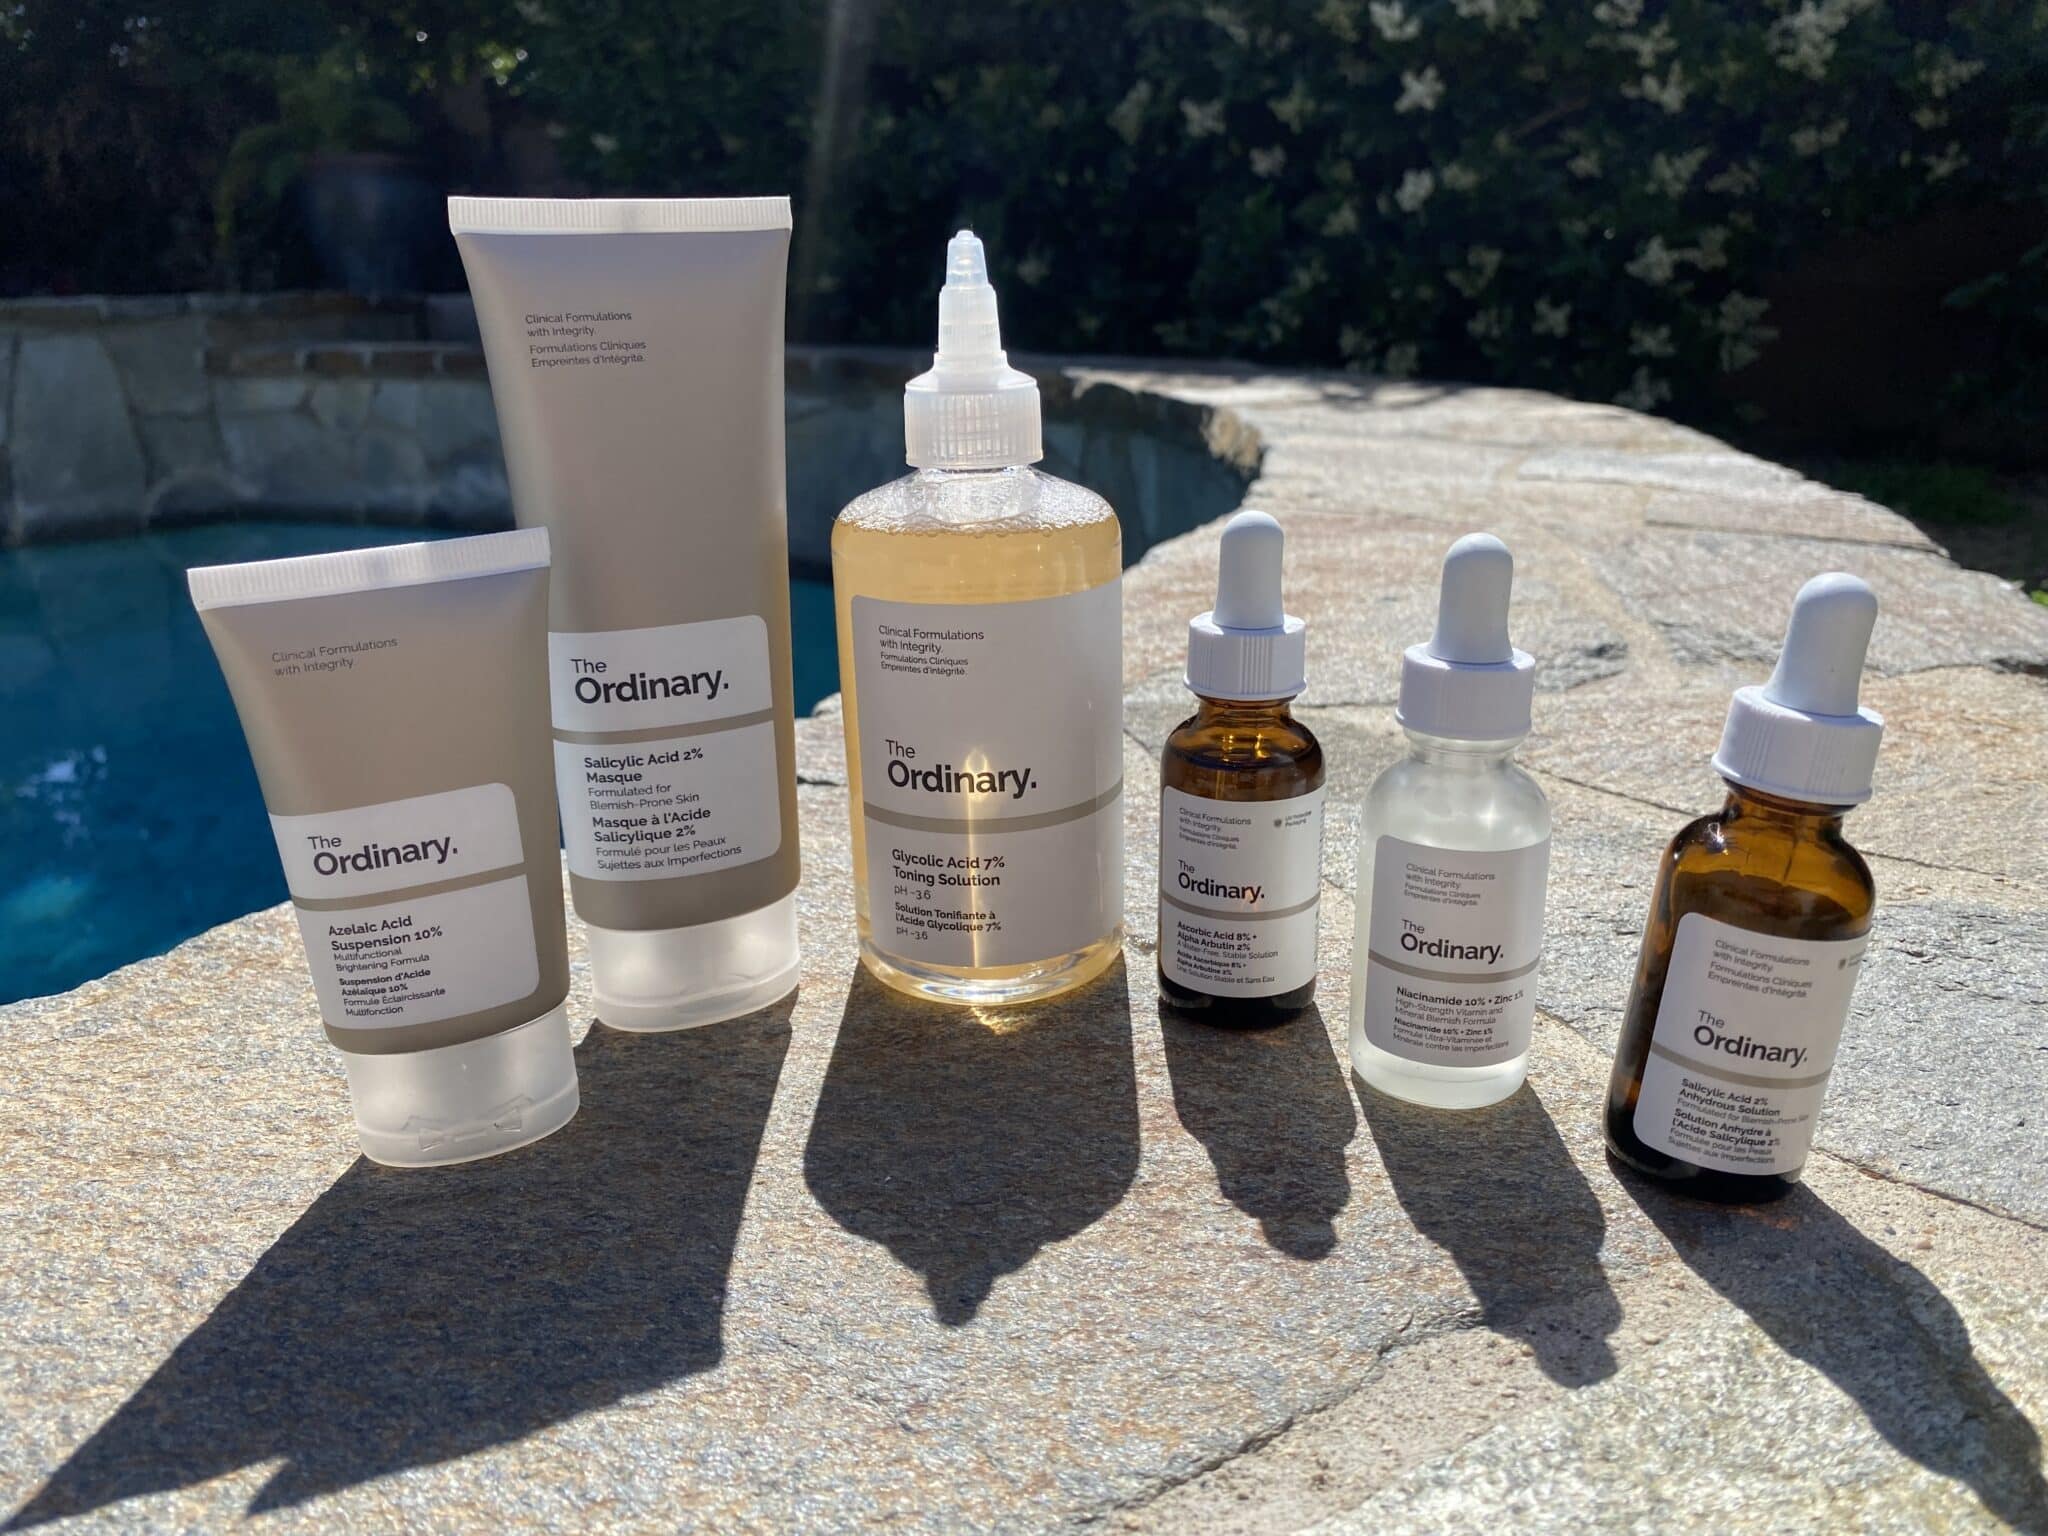 The Ordinary Review: 7 Best Products for Acne Prone Skin Types + Review